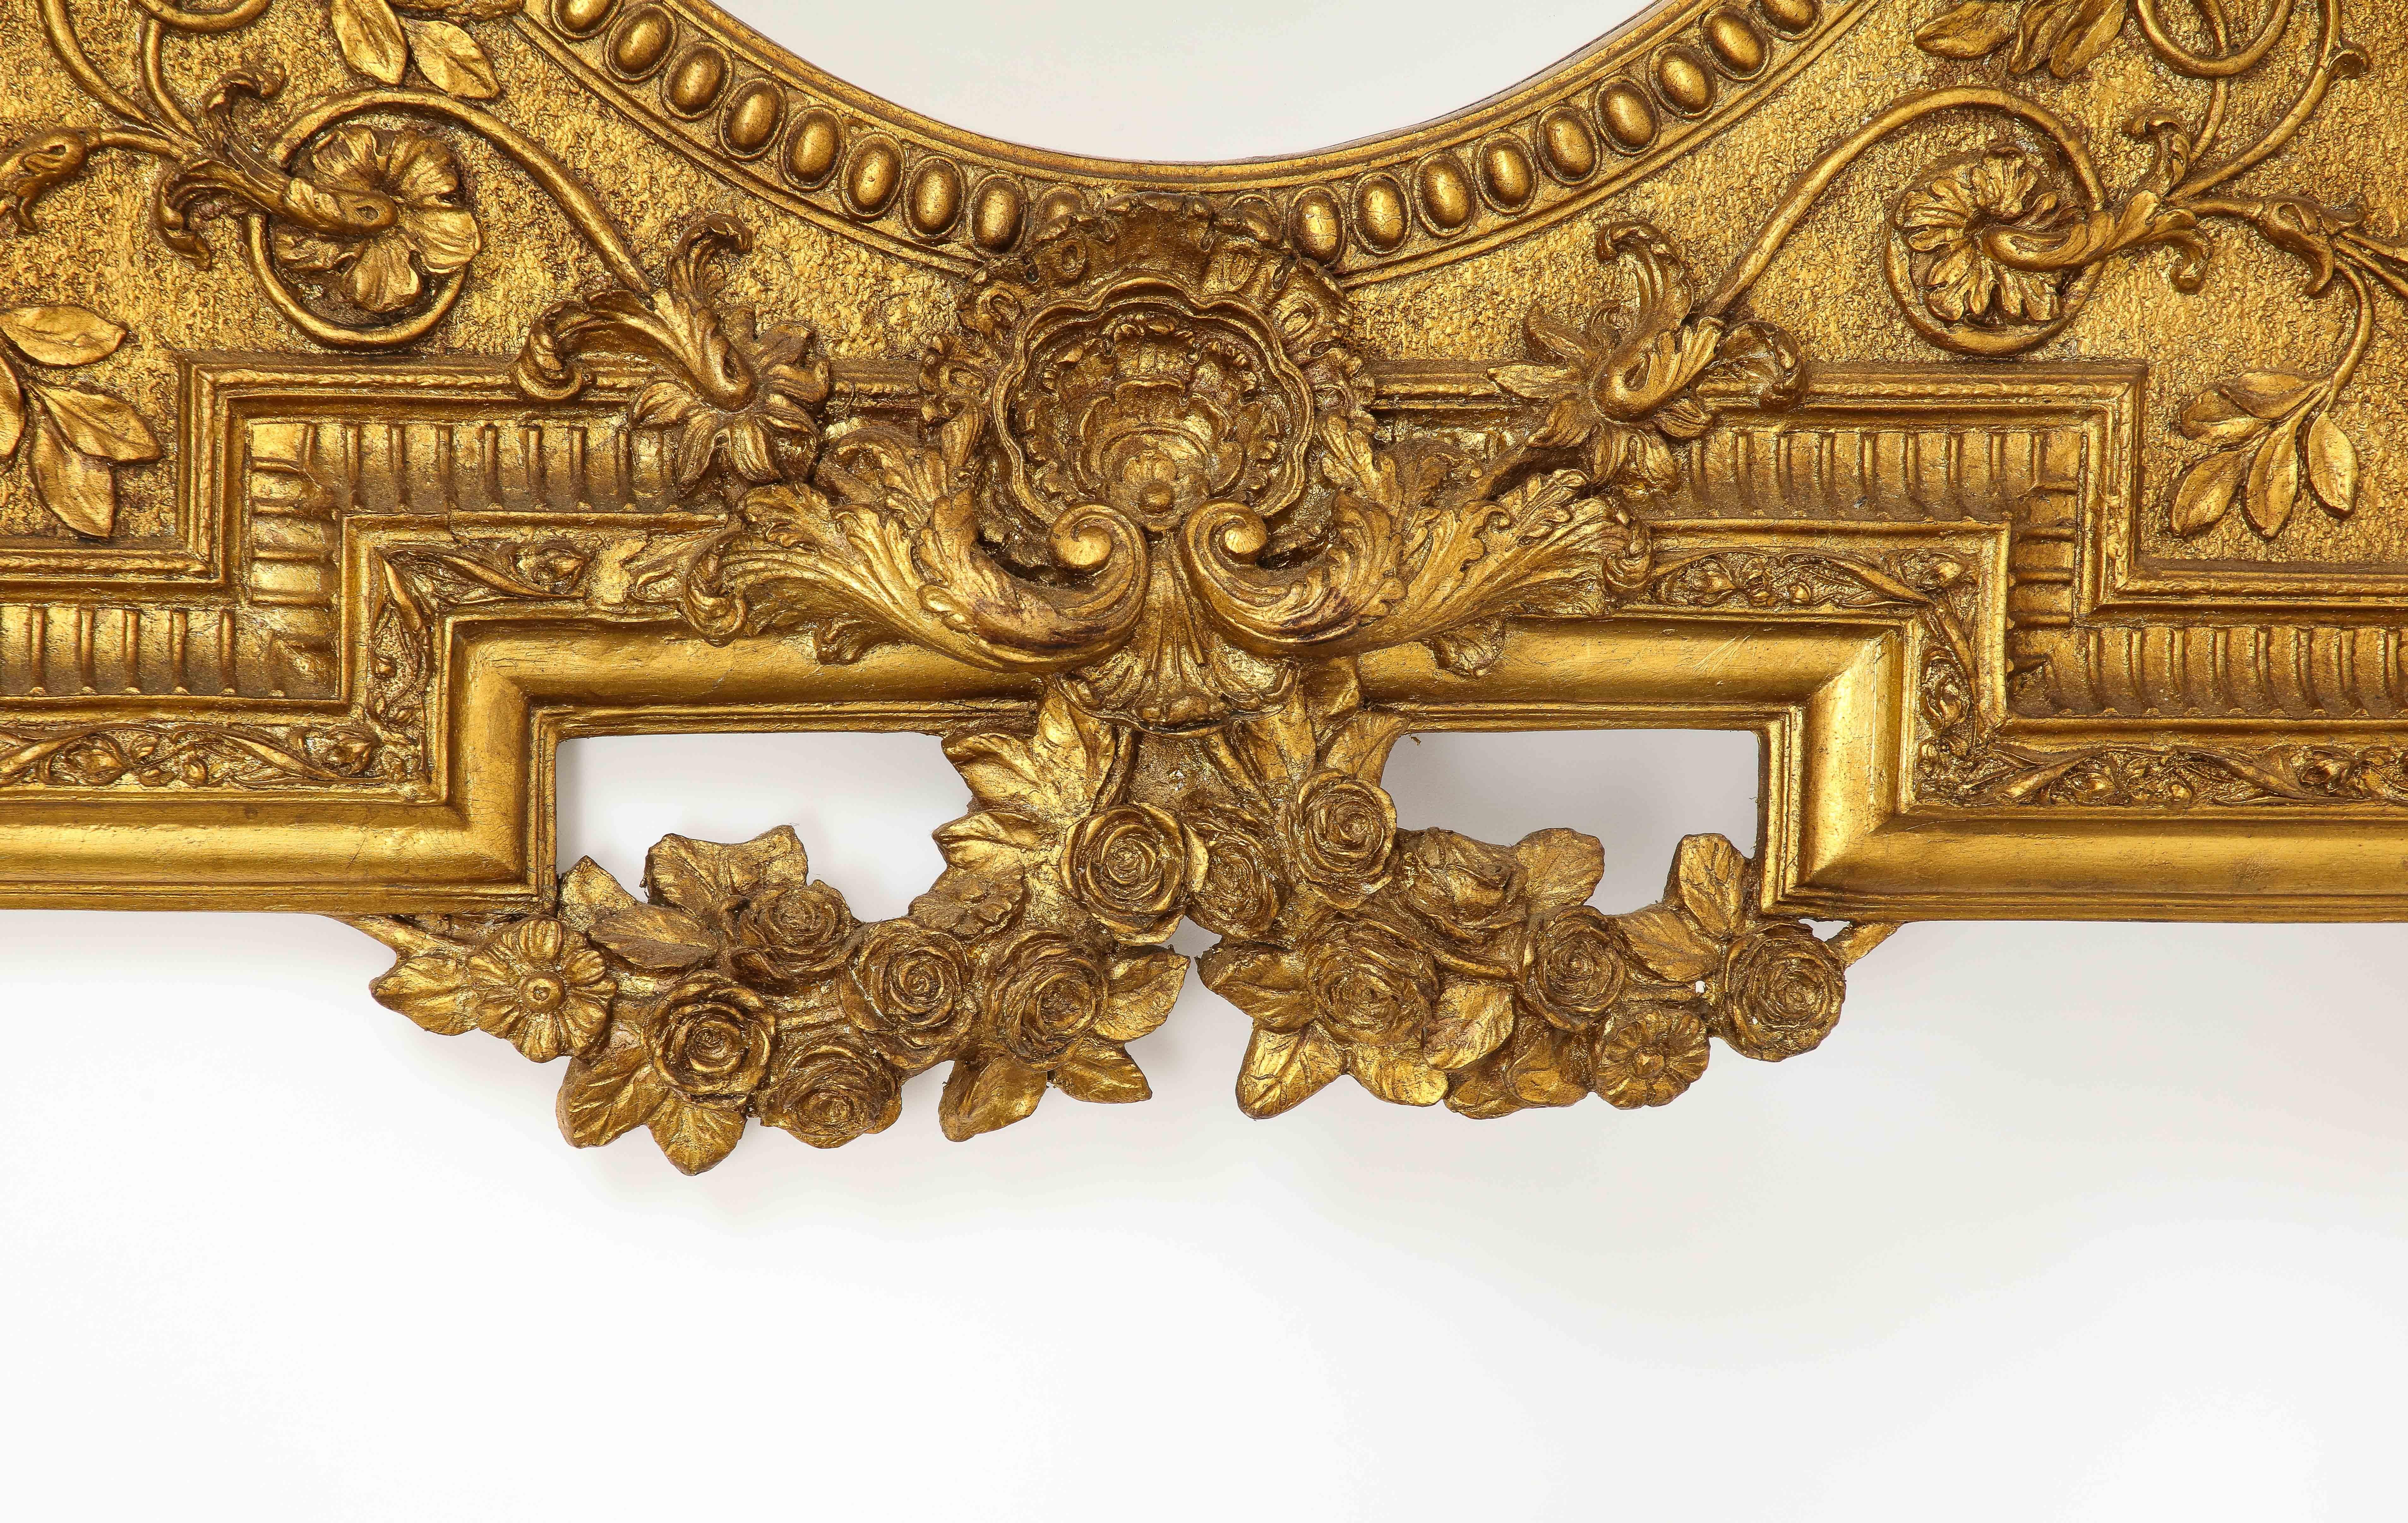 Marvelous French Giltwood Hand-Carved Beveled Mirror with Floral Vine Designs For Sale 5